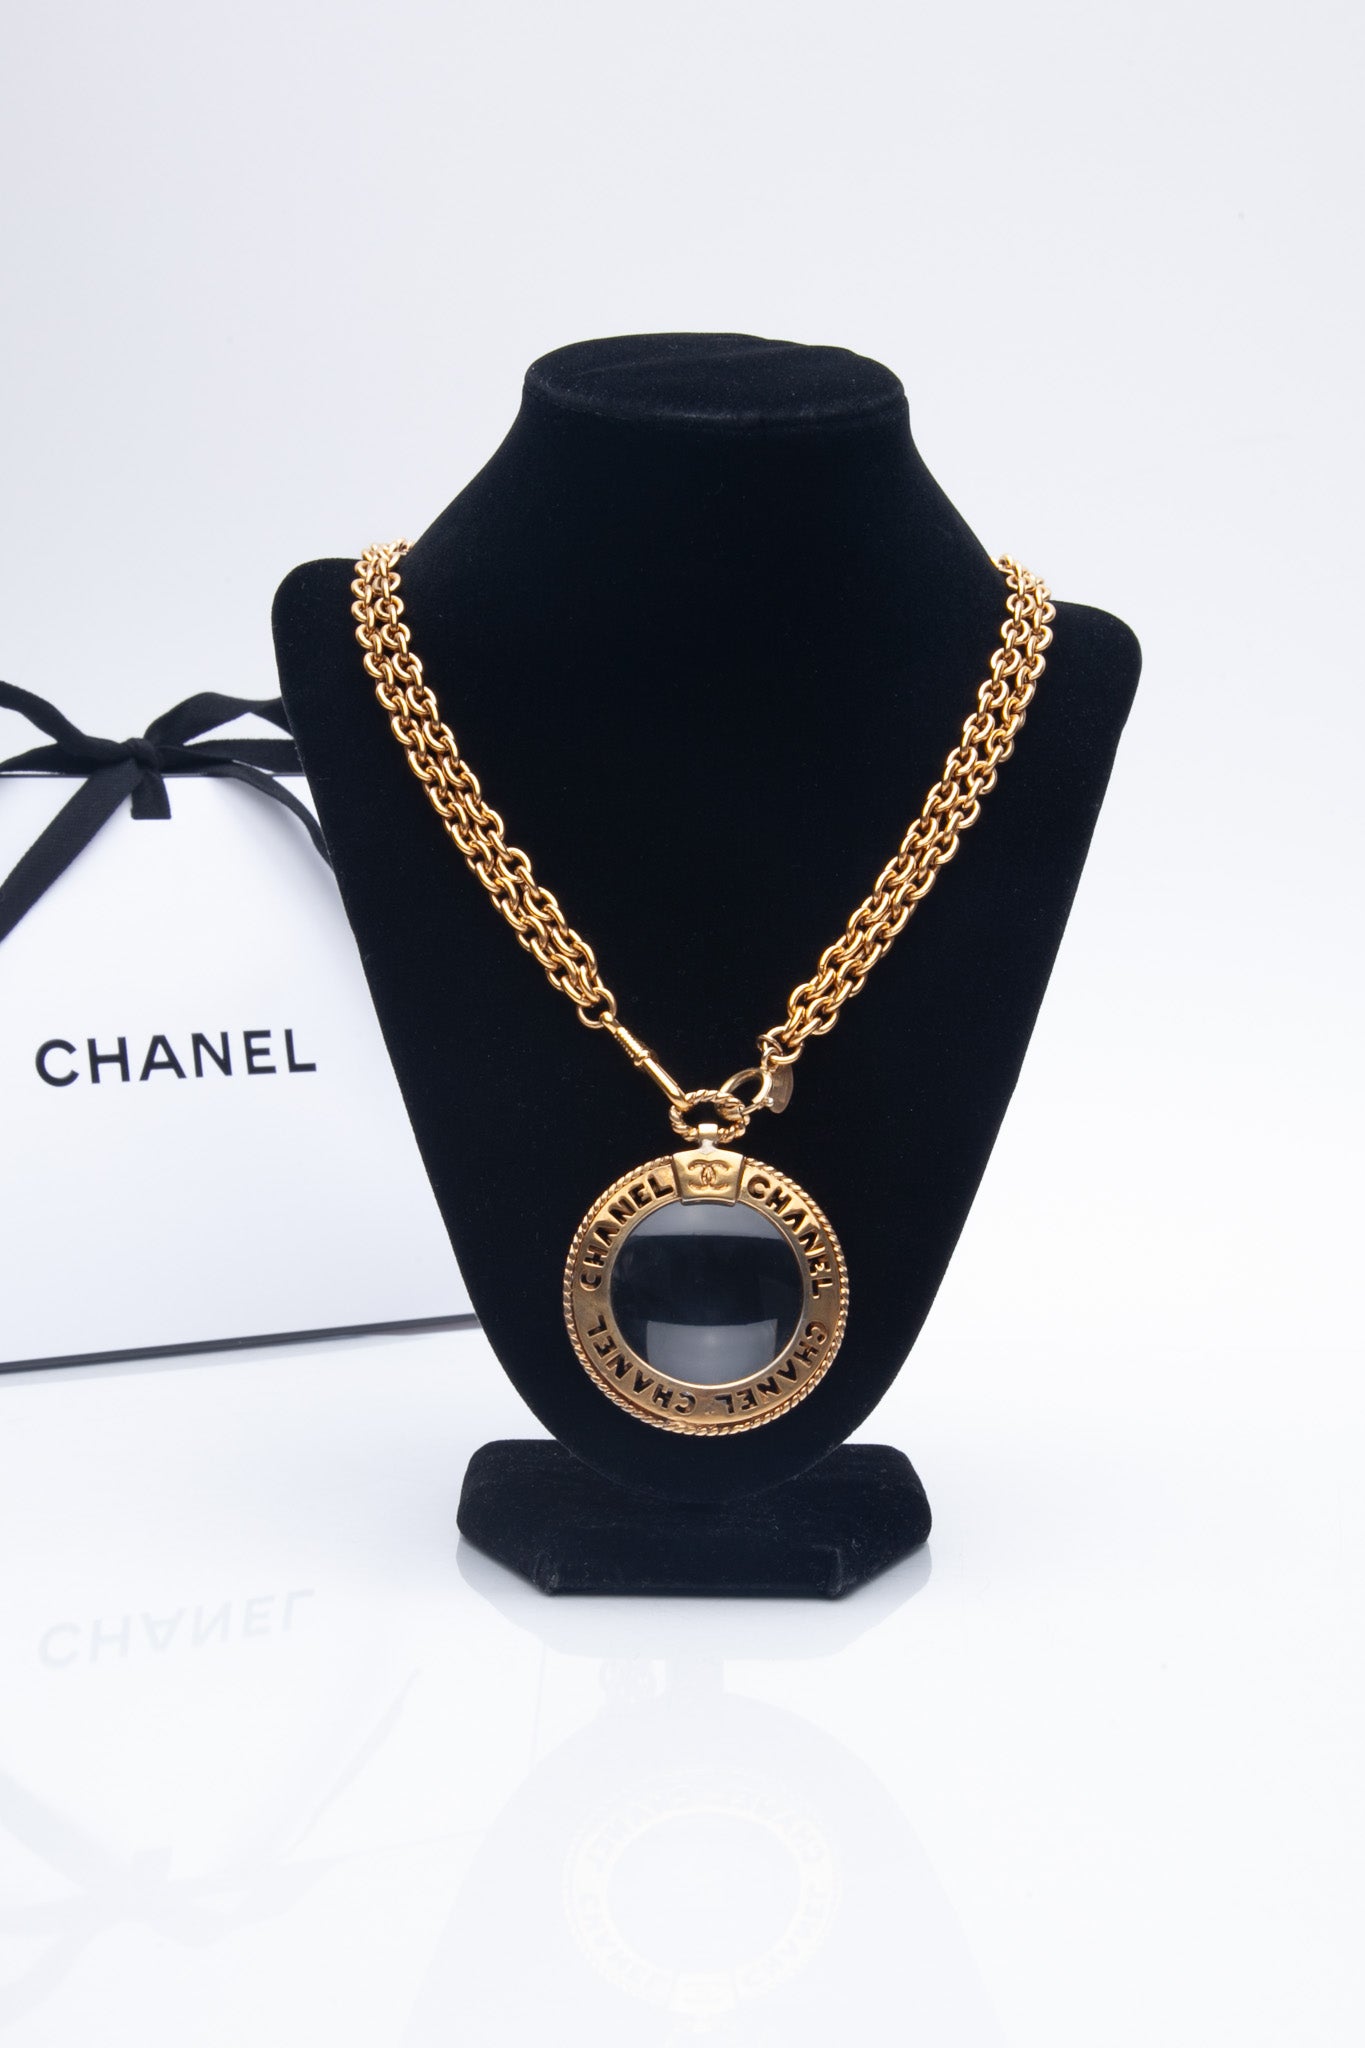 CHANEL  Black gold jewelry, Vintage chanel, Chanel jewelry